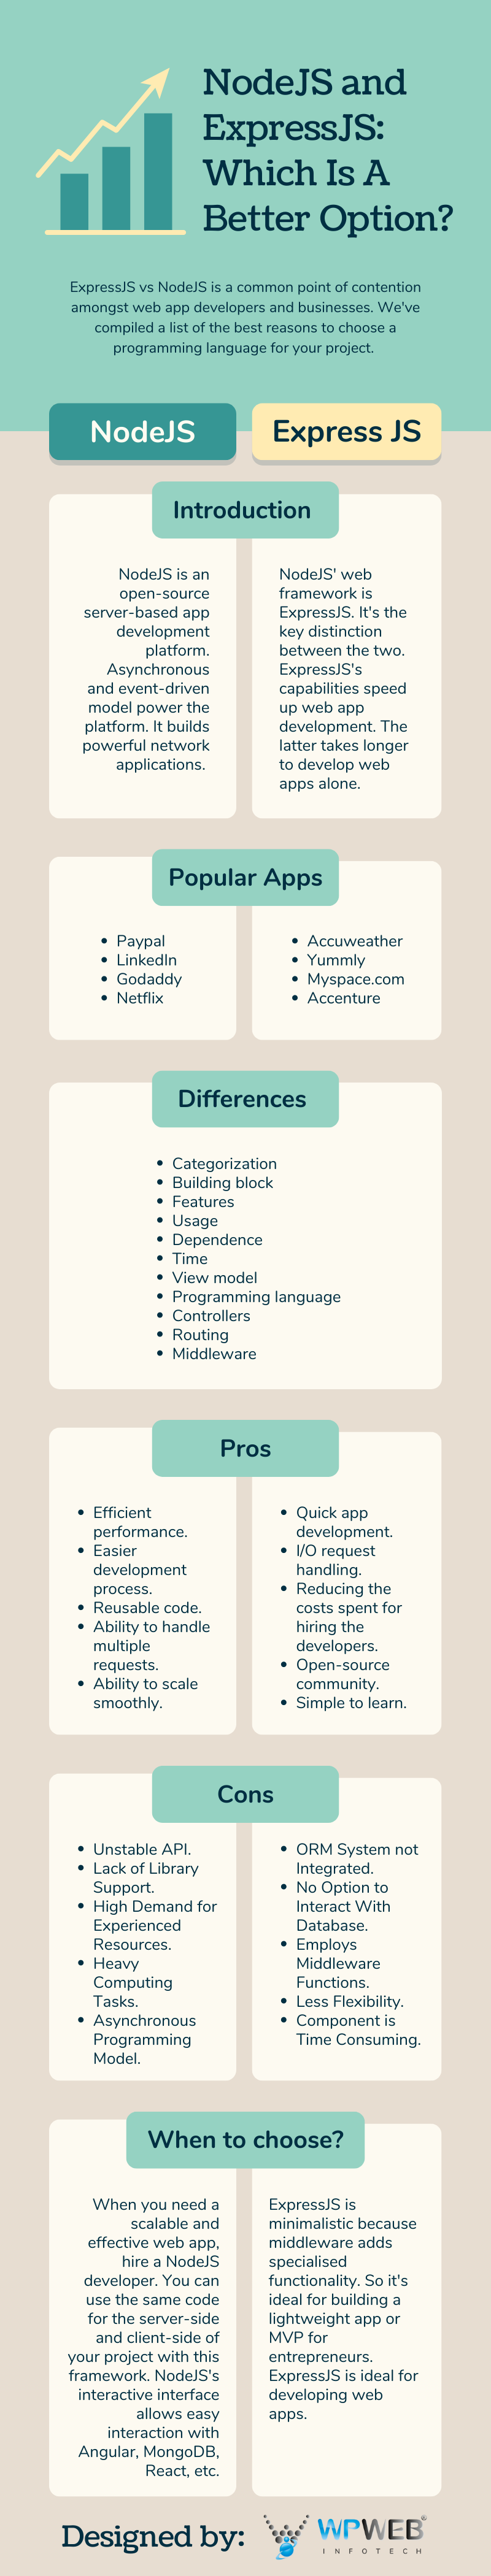 NodeJS and ExpressJS Which Is A Better Option.png